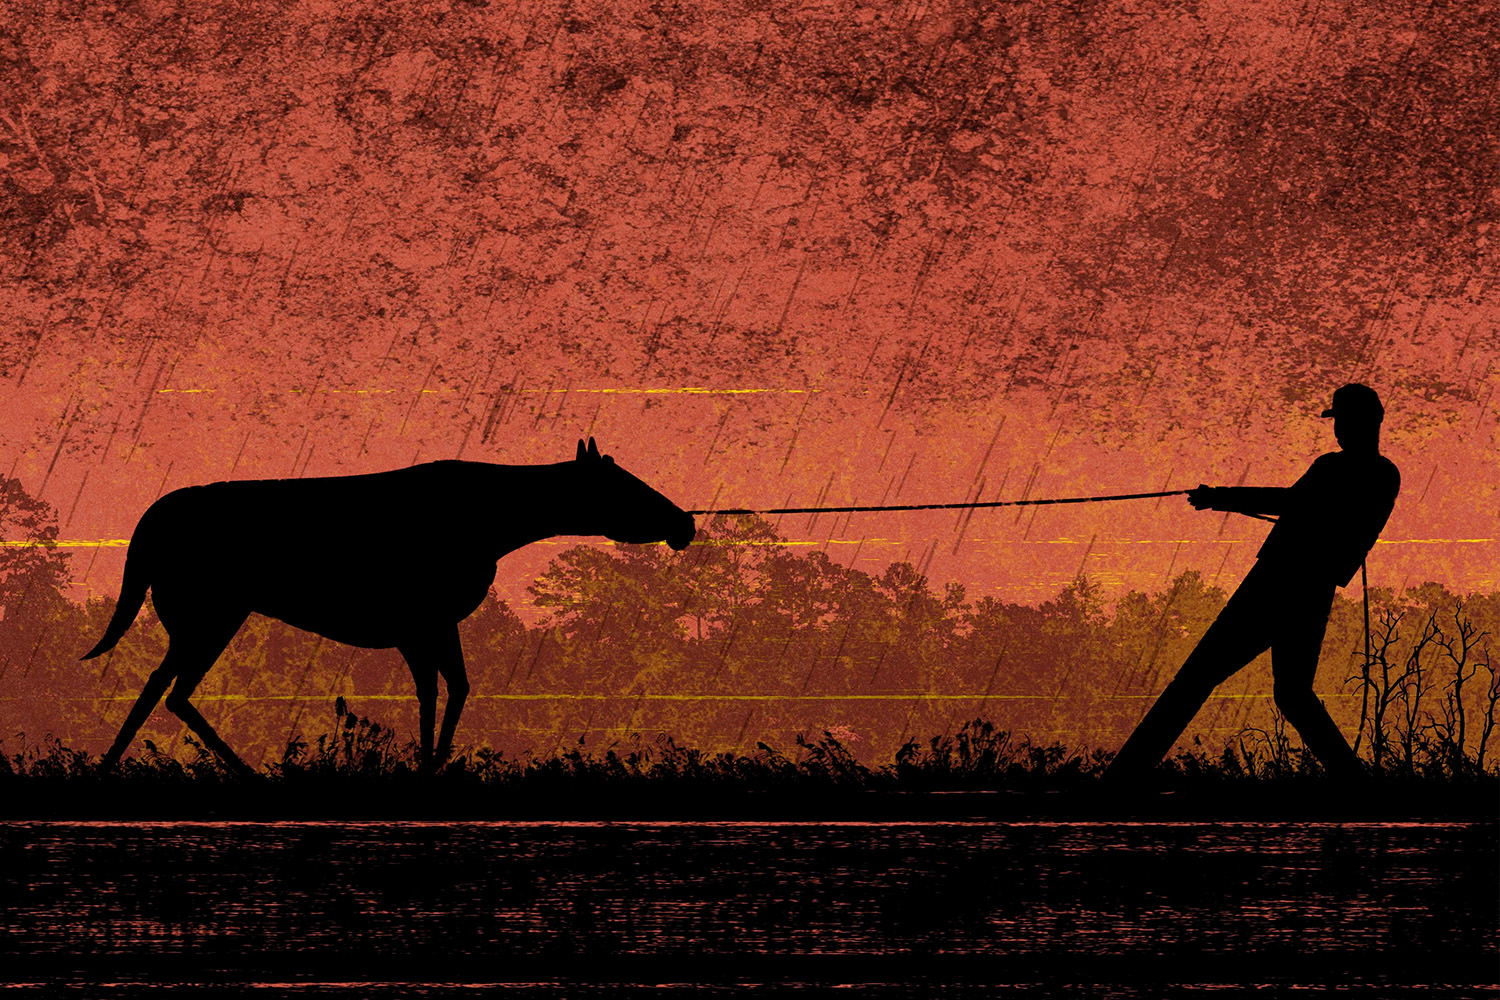 New animation launches our #StopHorseSmuggling campaign